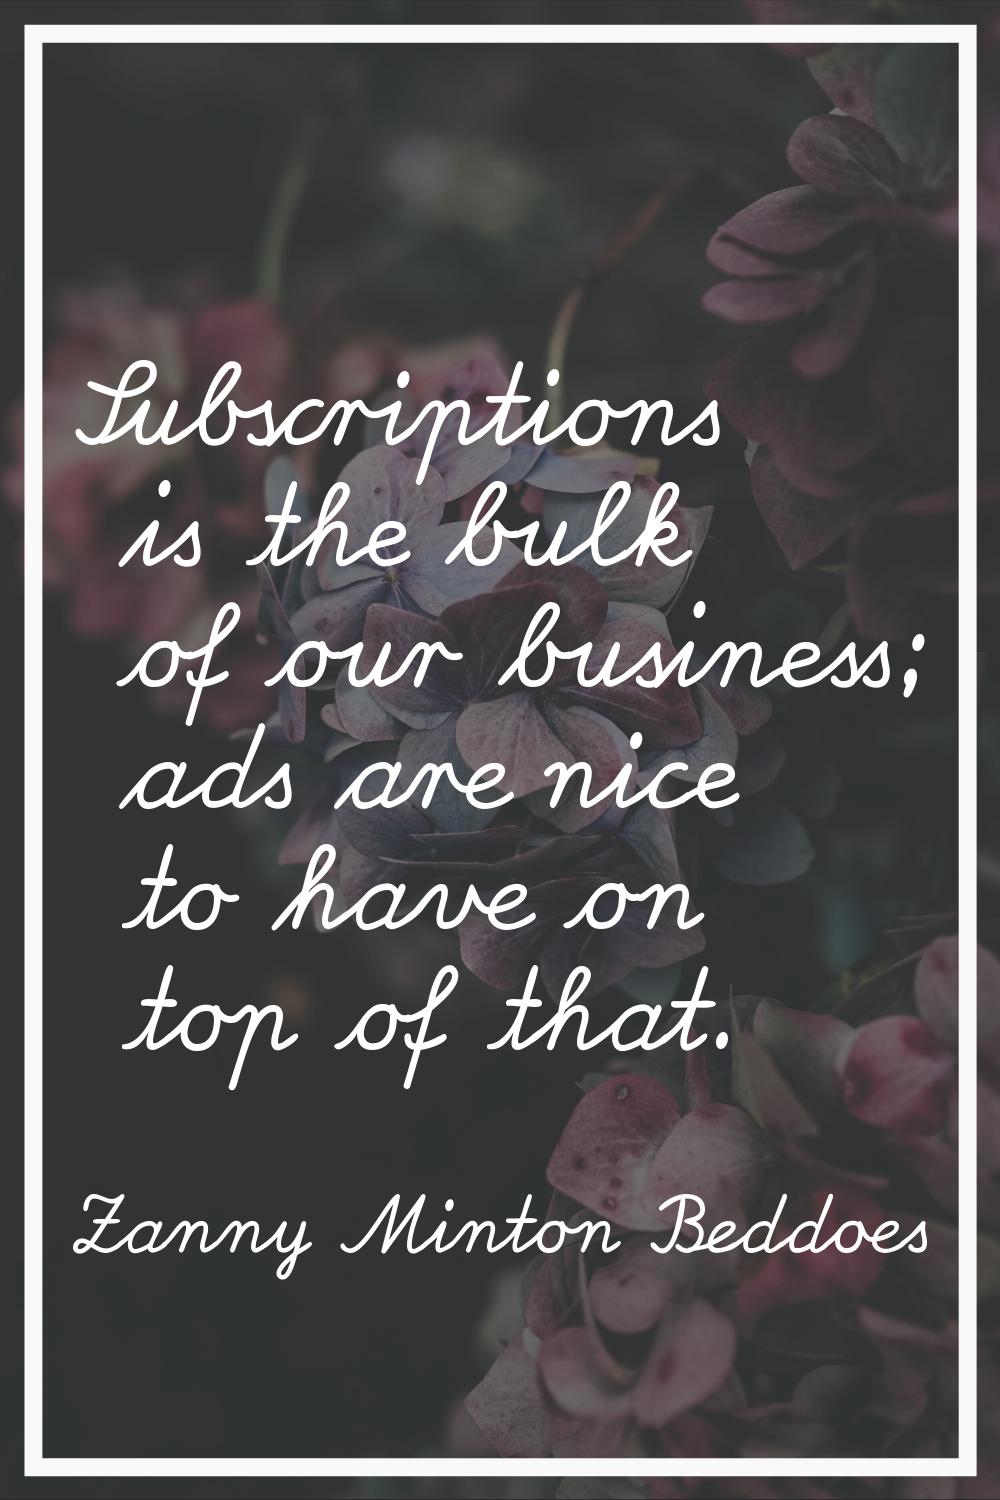 Subscriptions is the bulk of our business; ads are nice to have on top of that.